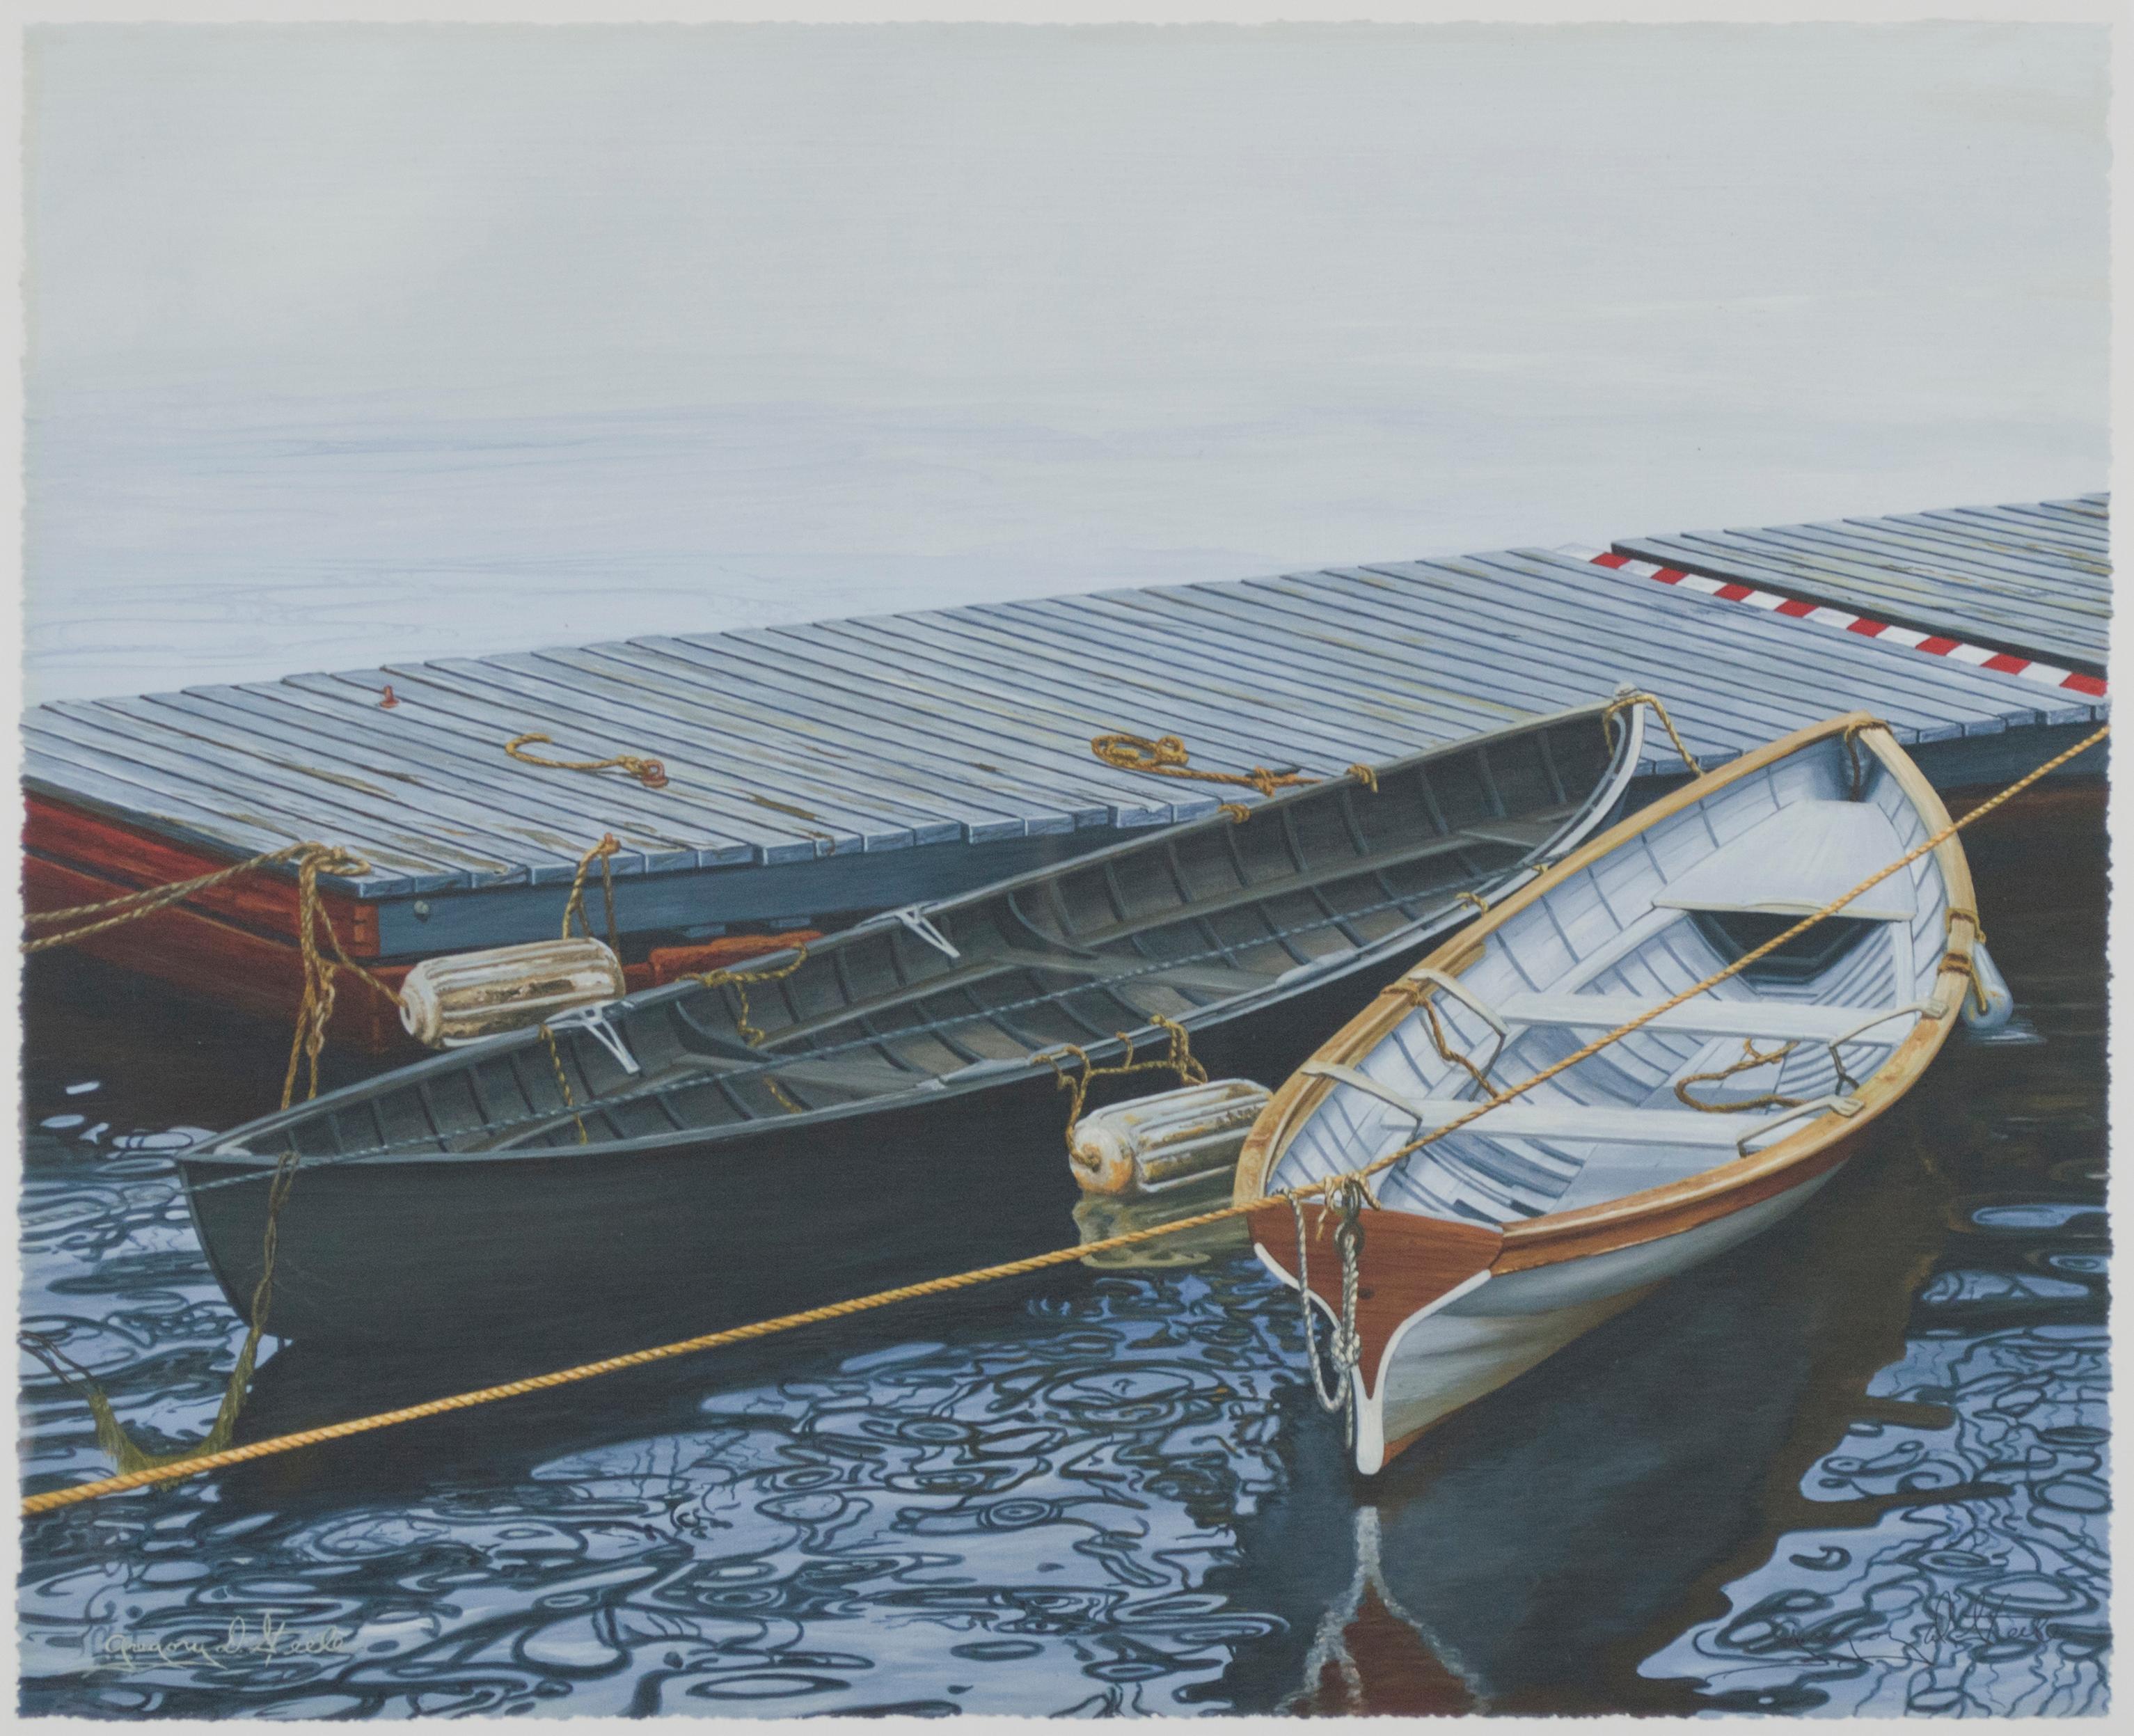 "Boats at Camdon" is a giclee print after 1998 oil painting by Gregory D. Steele. Steele presents here a highly naturalistic but quiet scene of a blue-green canoe and a white dinghy moored at a floating wooden dock. The water glistens with swirling